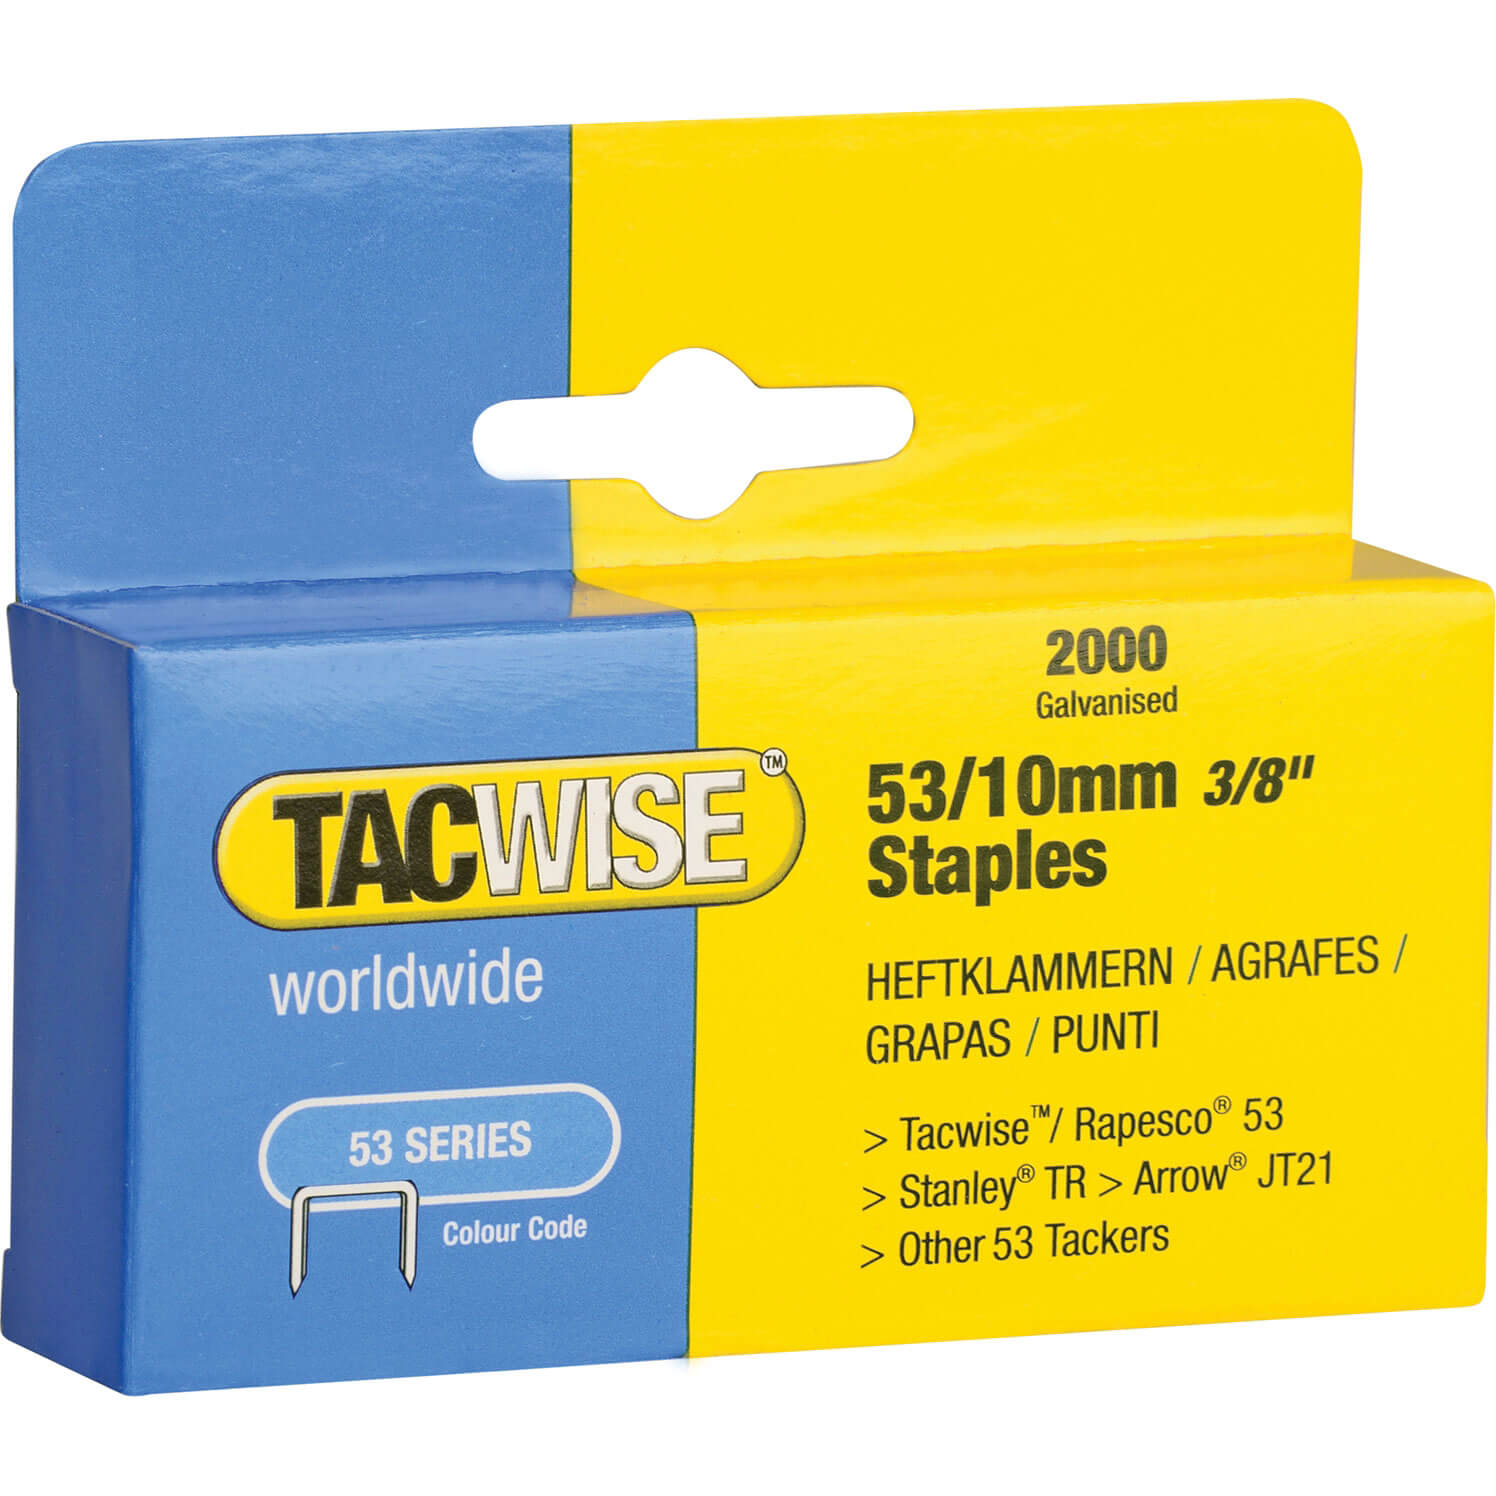 Photos - Staples Tacwise 53/12  10mm Pack of 2000 336 